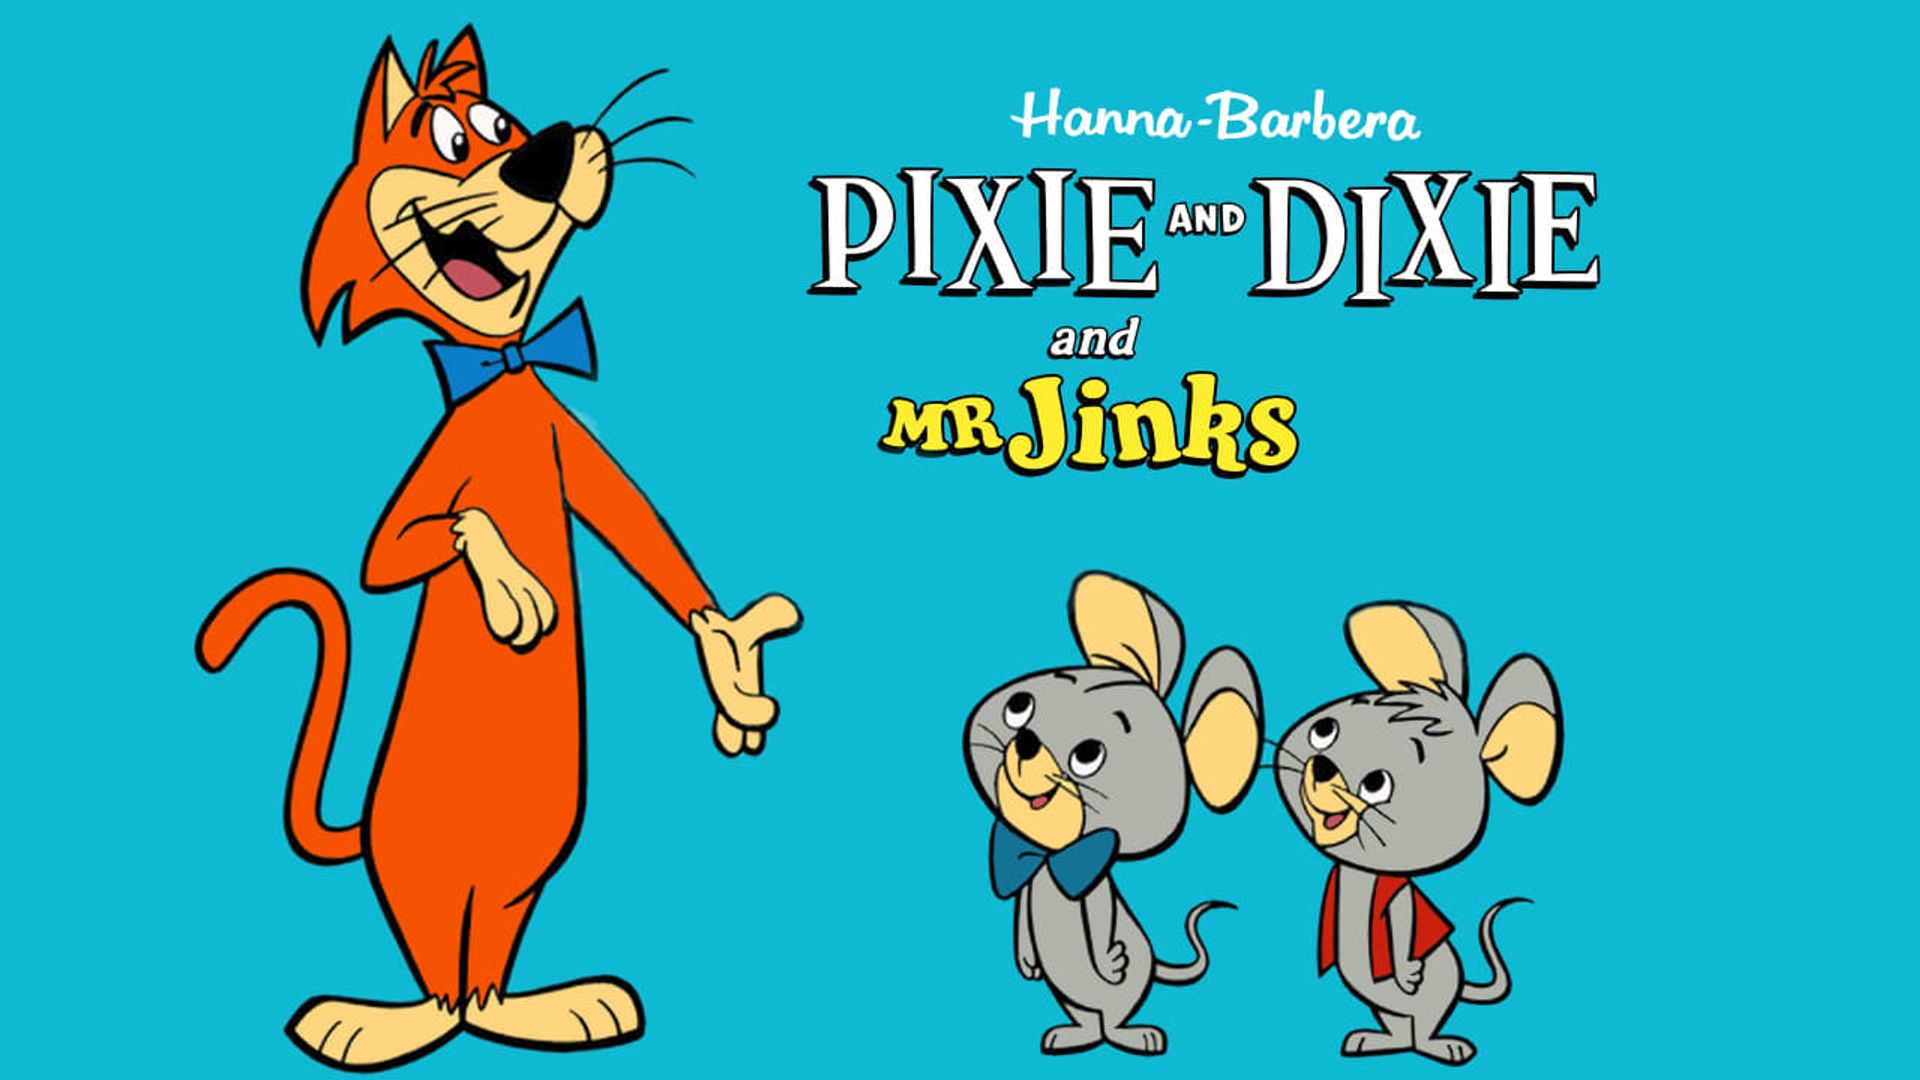 Pixie and Dixie and Mr. Jinks background